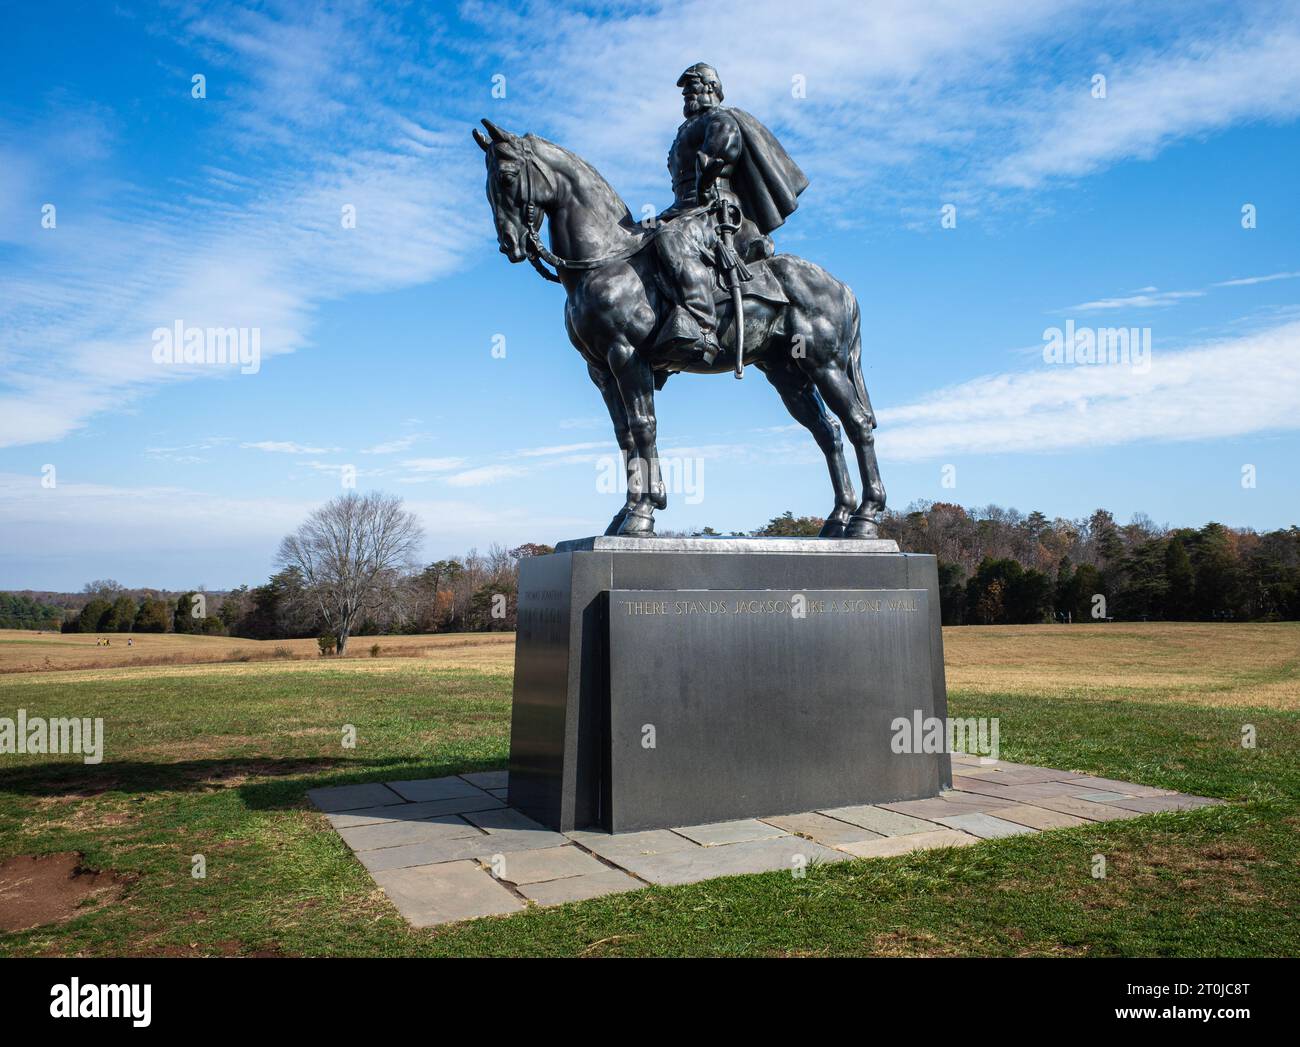 In Manassas, Virginia, USA, at Henry Hill by Bull Run, the majestic Stonewall Jackson statue on horseback pays homage to history. Stock Photo